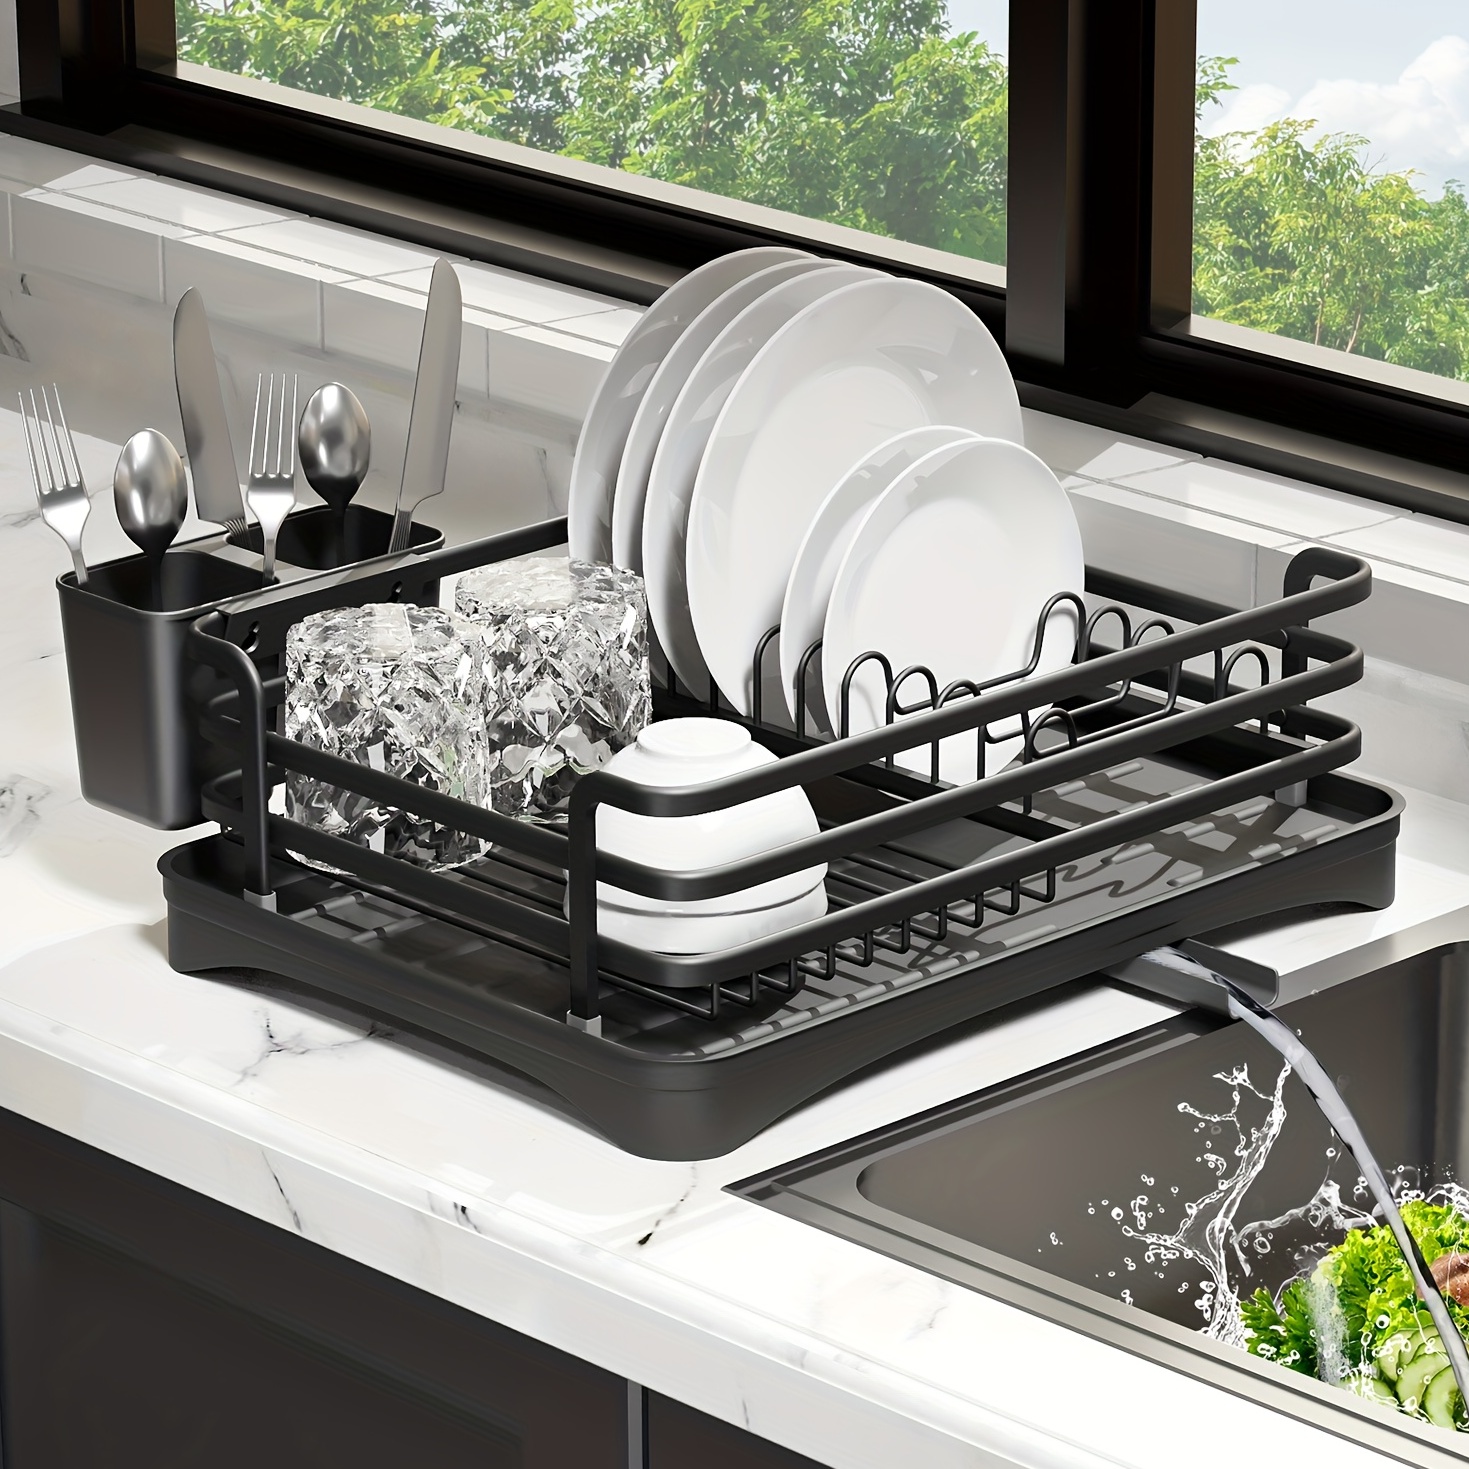 Extendable Dish Drying Rack,Space-Saving Multifunctional Compact Dish Racks  for Kitchen Counter,in Sink Small Dish Drying Rack, Auto-Drain Stainless